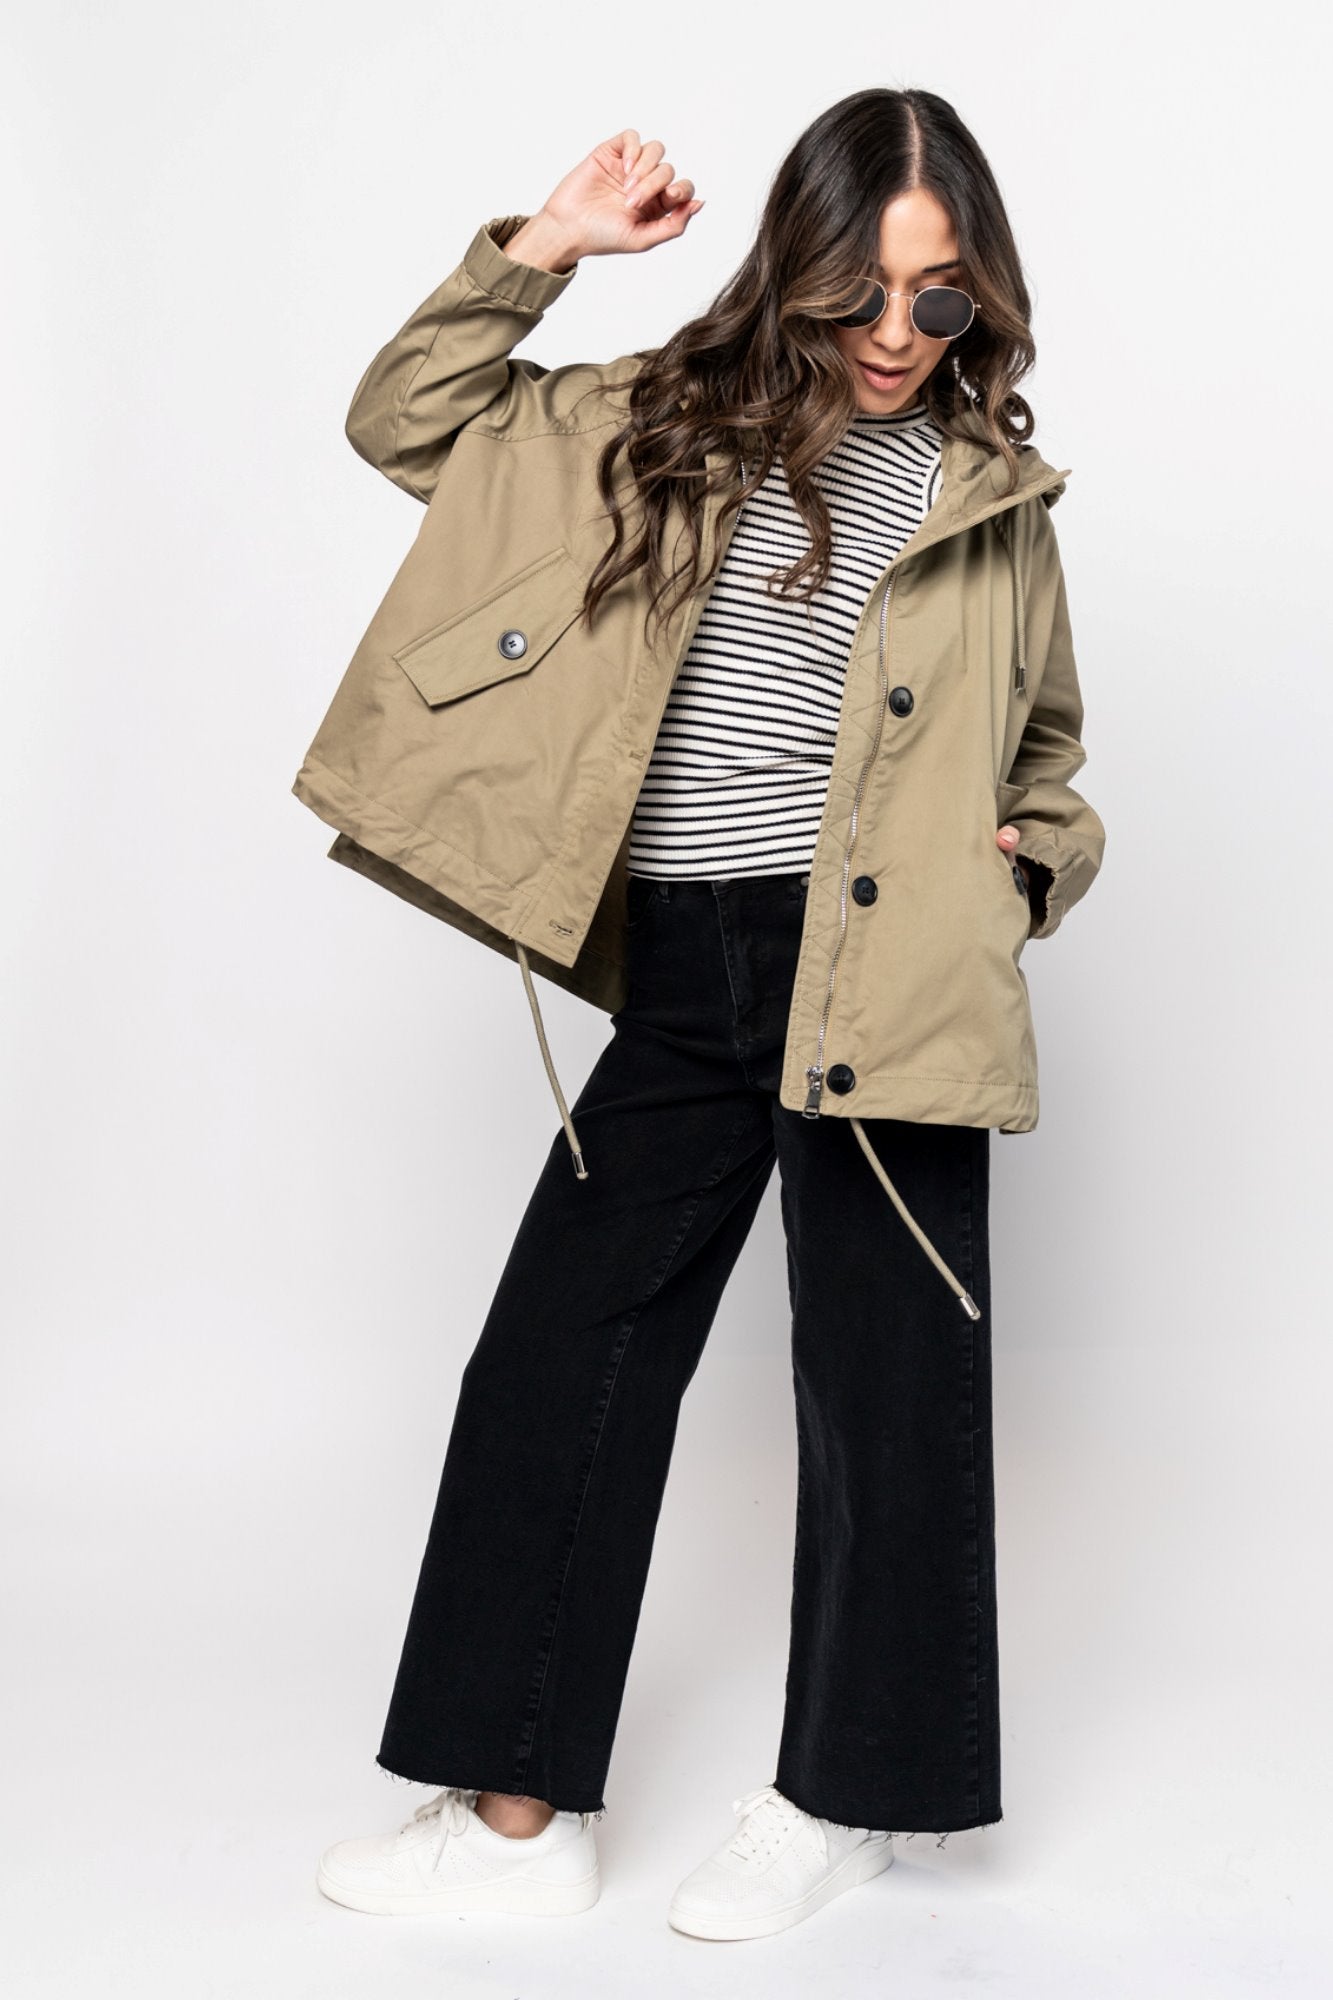 Anderson Jacket in Light Olive Clothing Holley Girl 